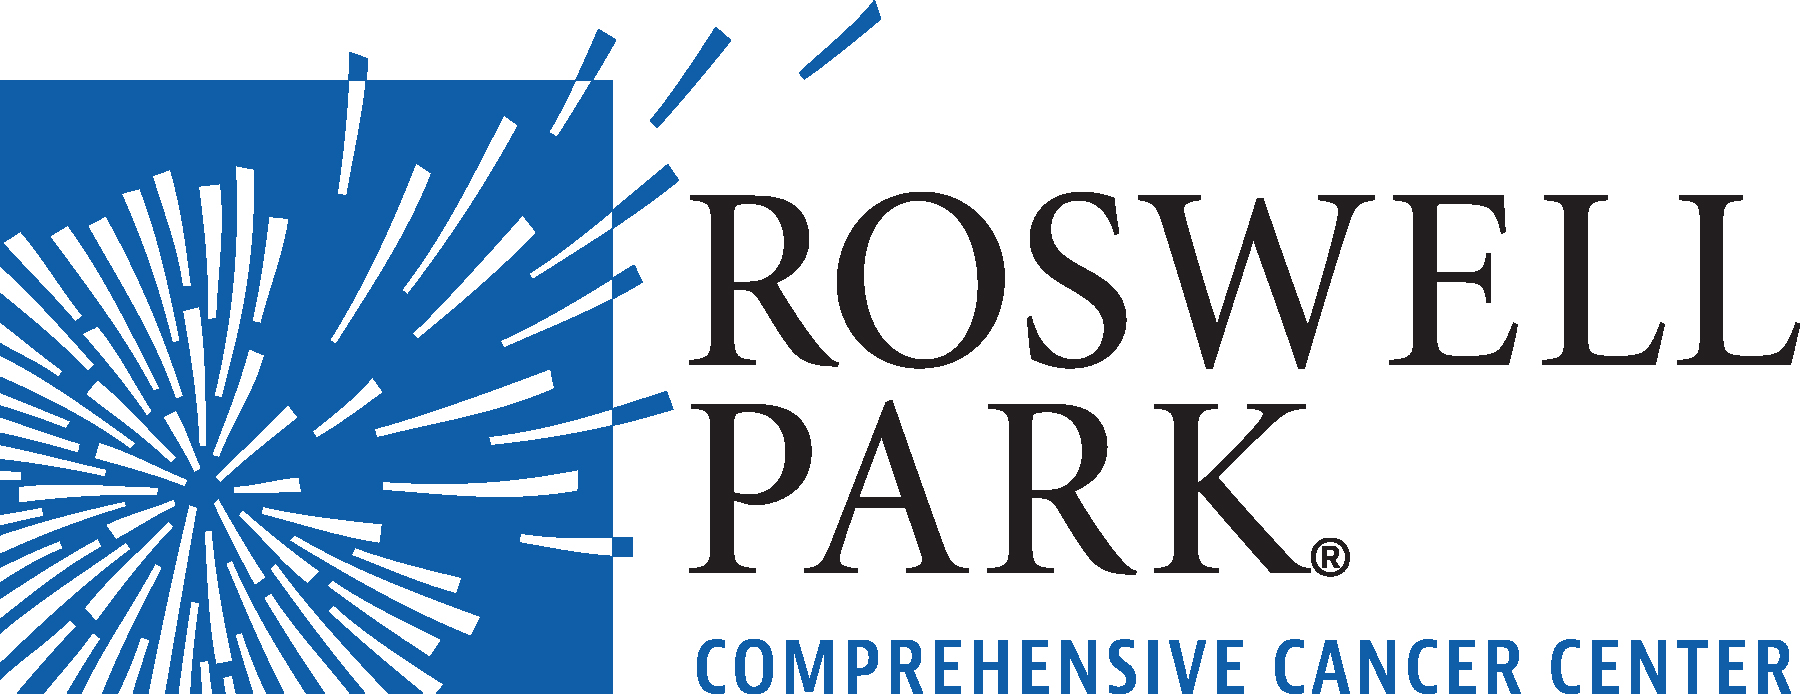 Roswell Park Investigators Reveal Changes to Immune Status in Patient Tumors After Radiation